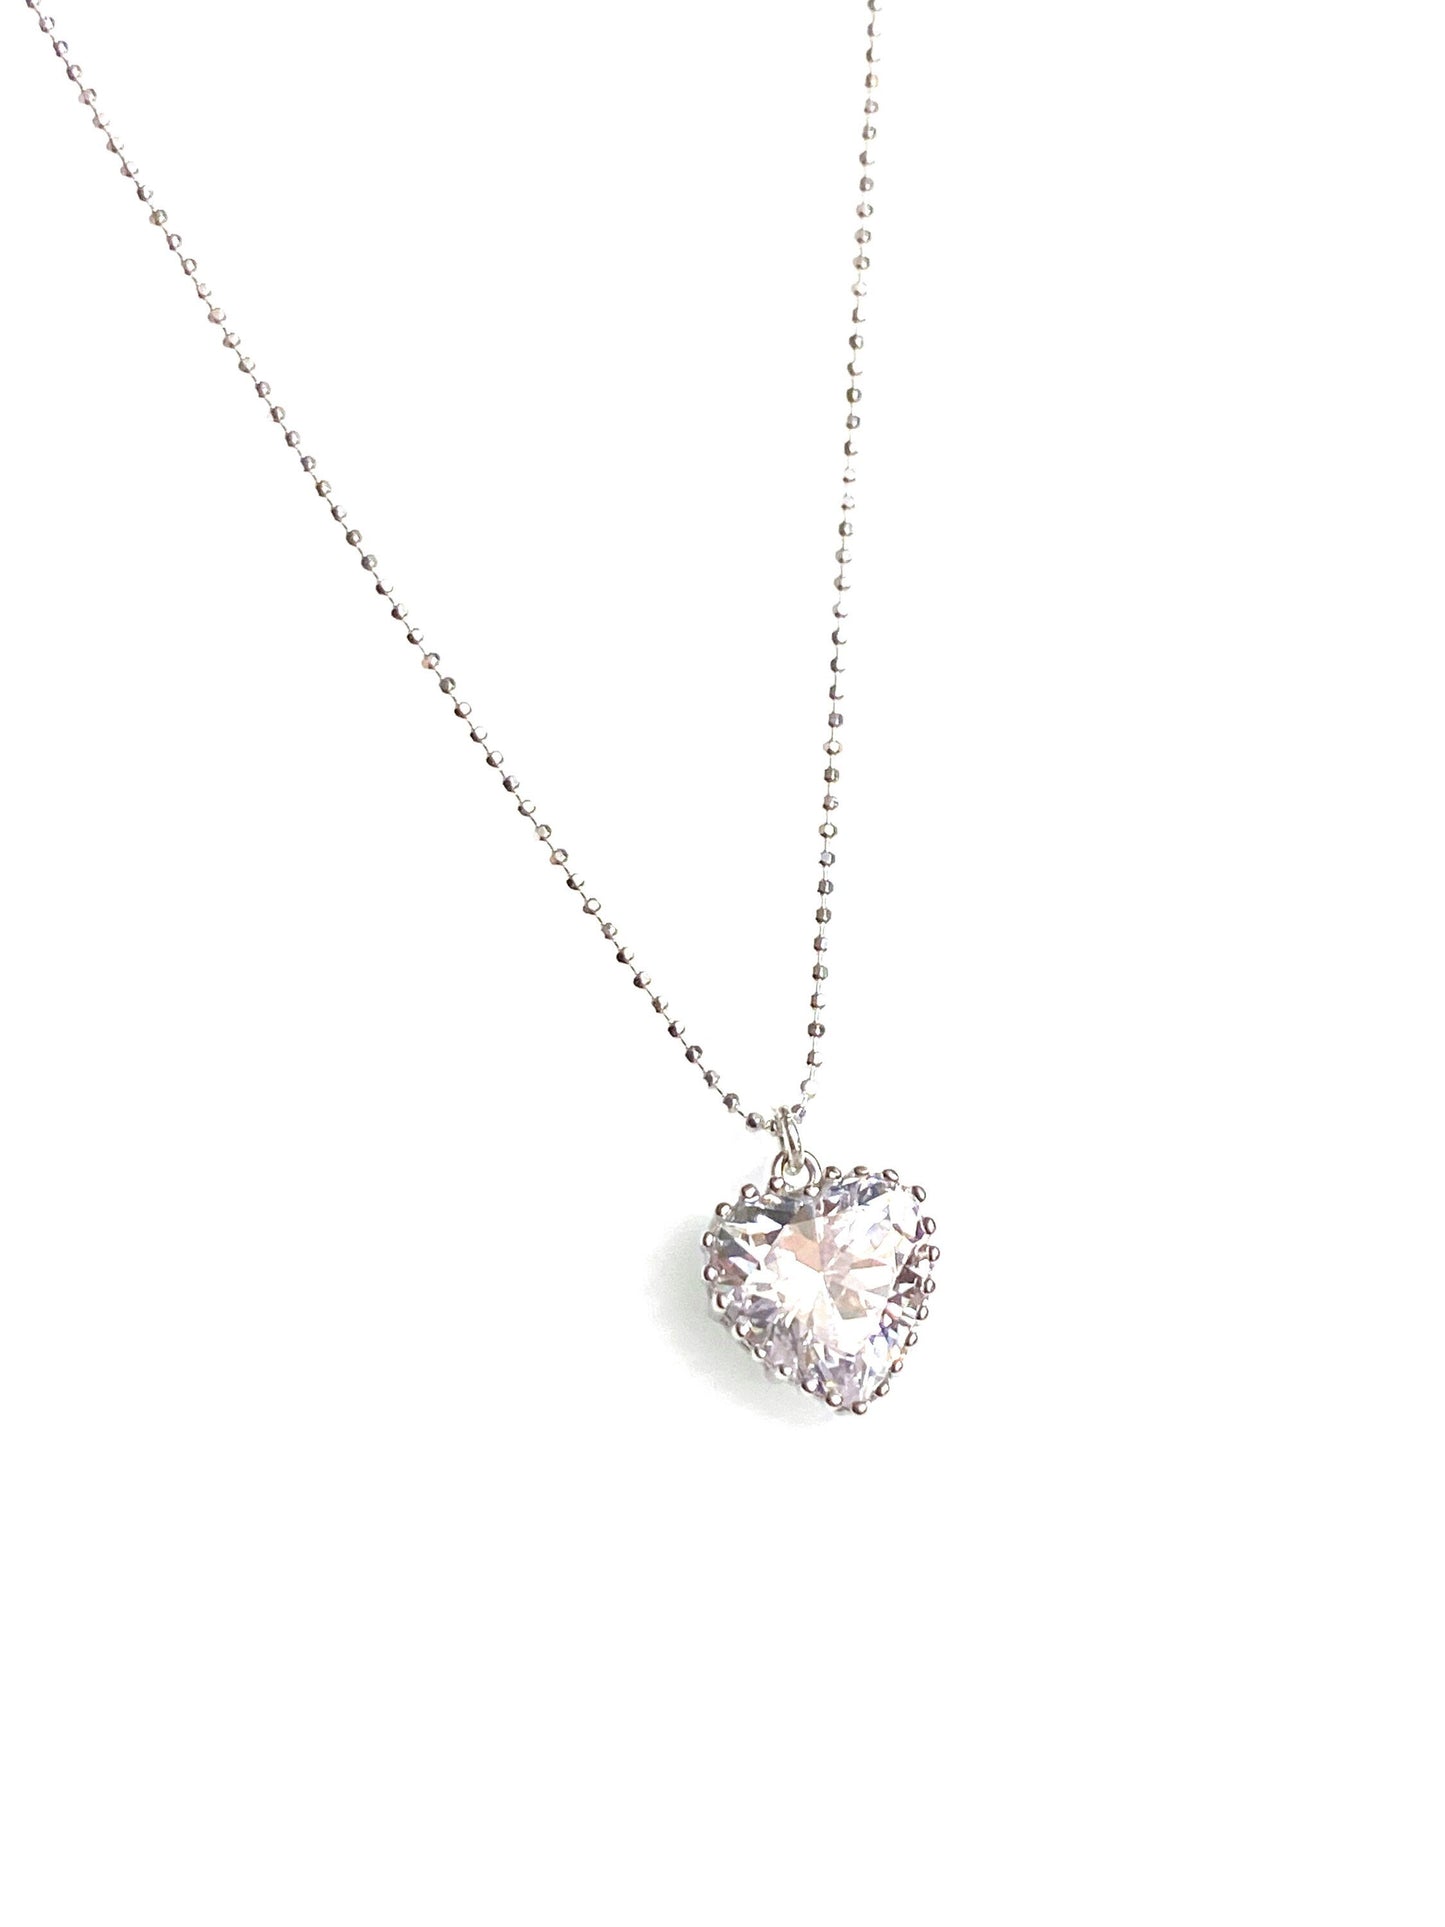 Sparkly heart necklace (sterling silver)